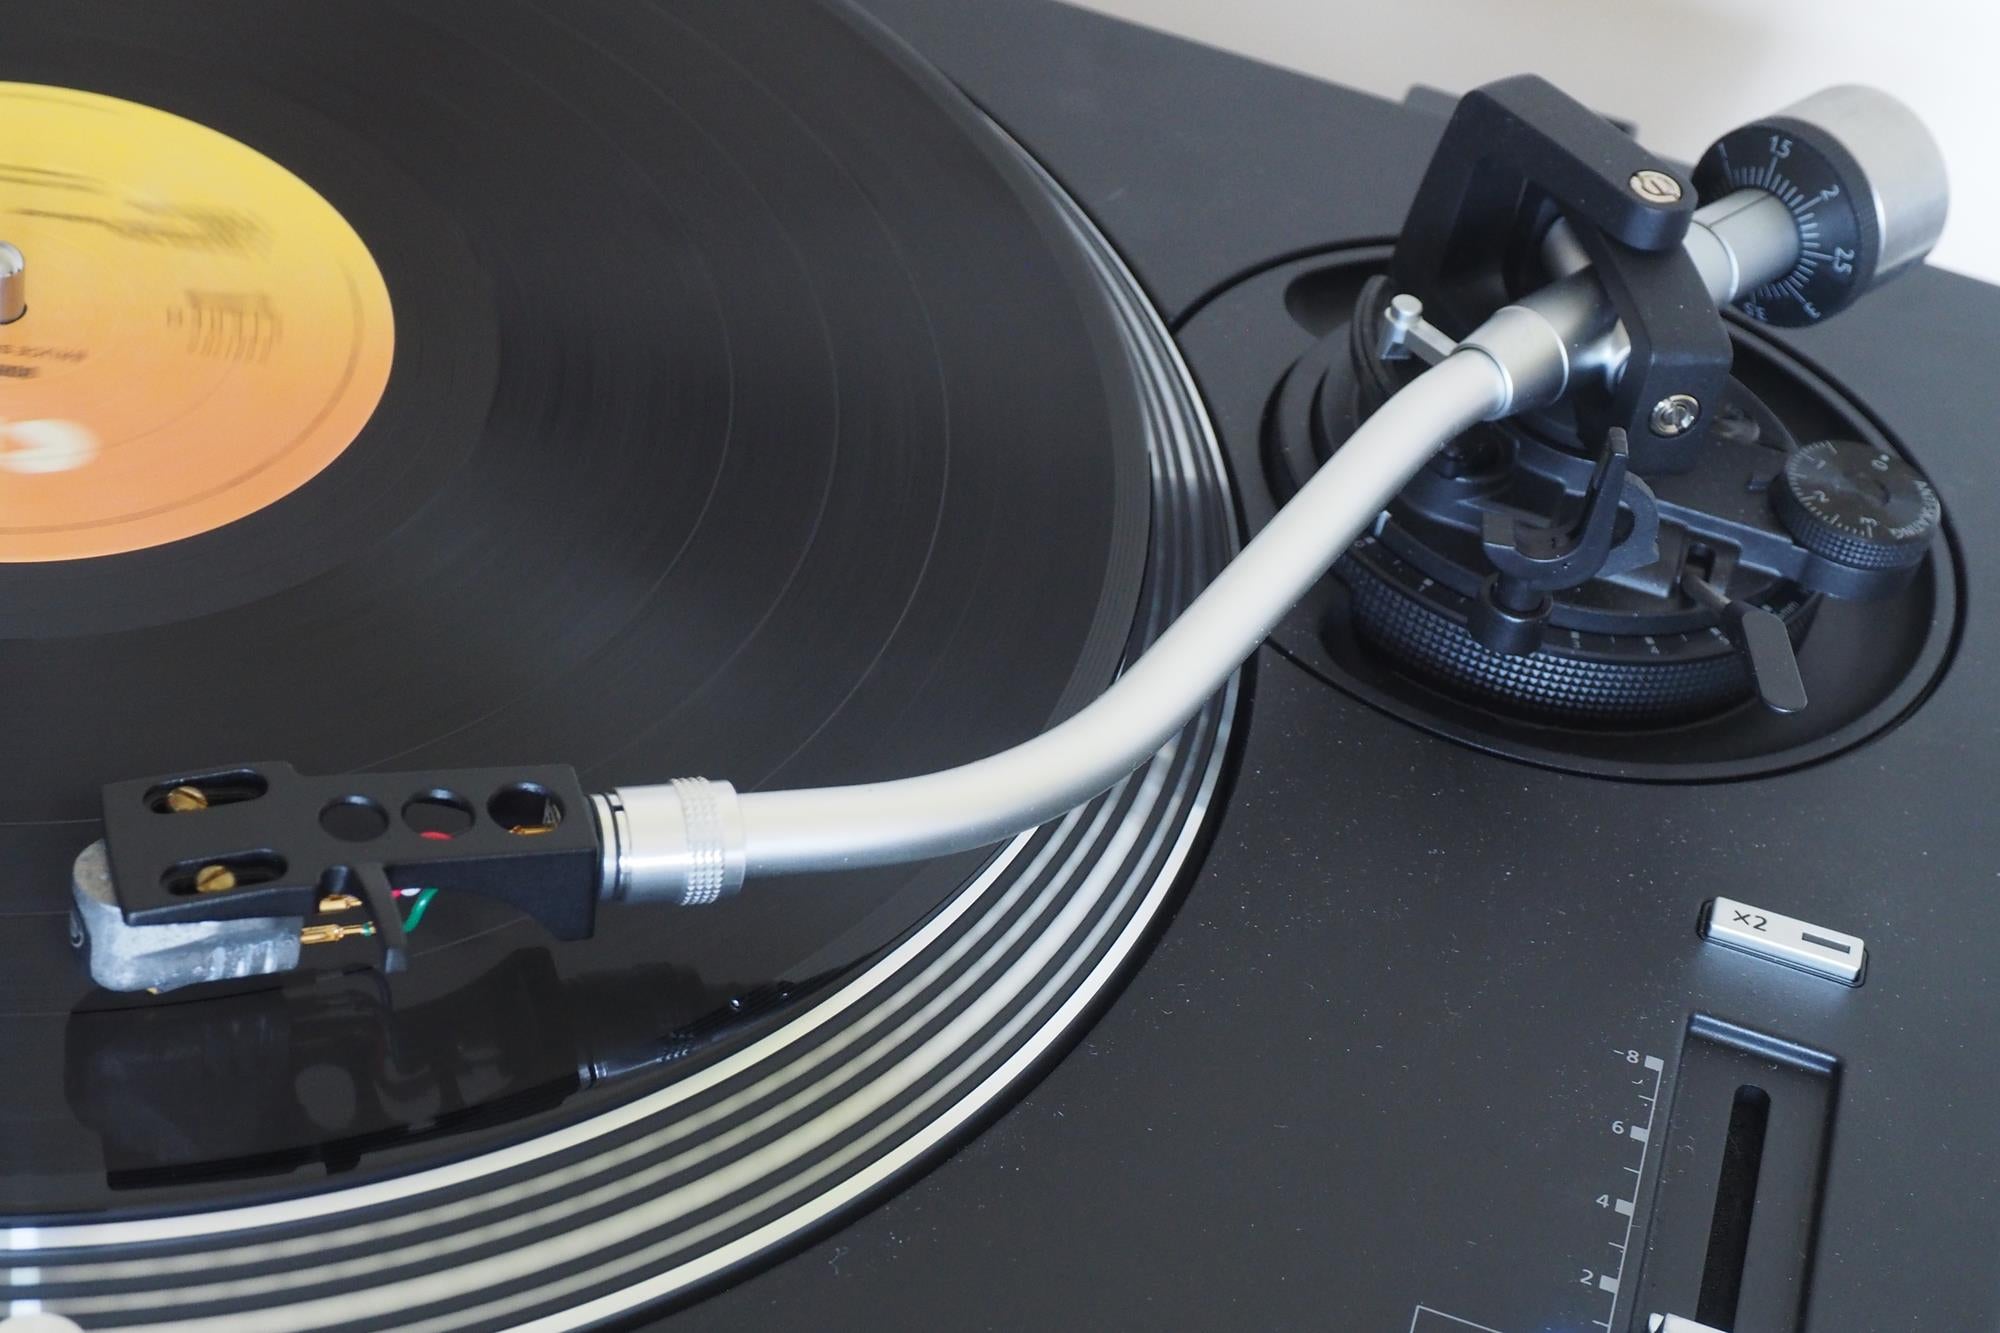 Technics SL-1200GR turntable with a playing vinyl record.